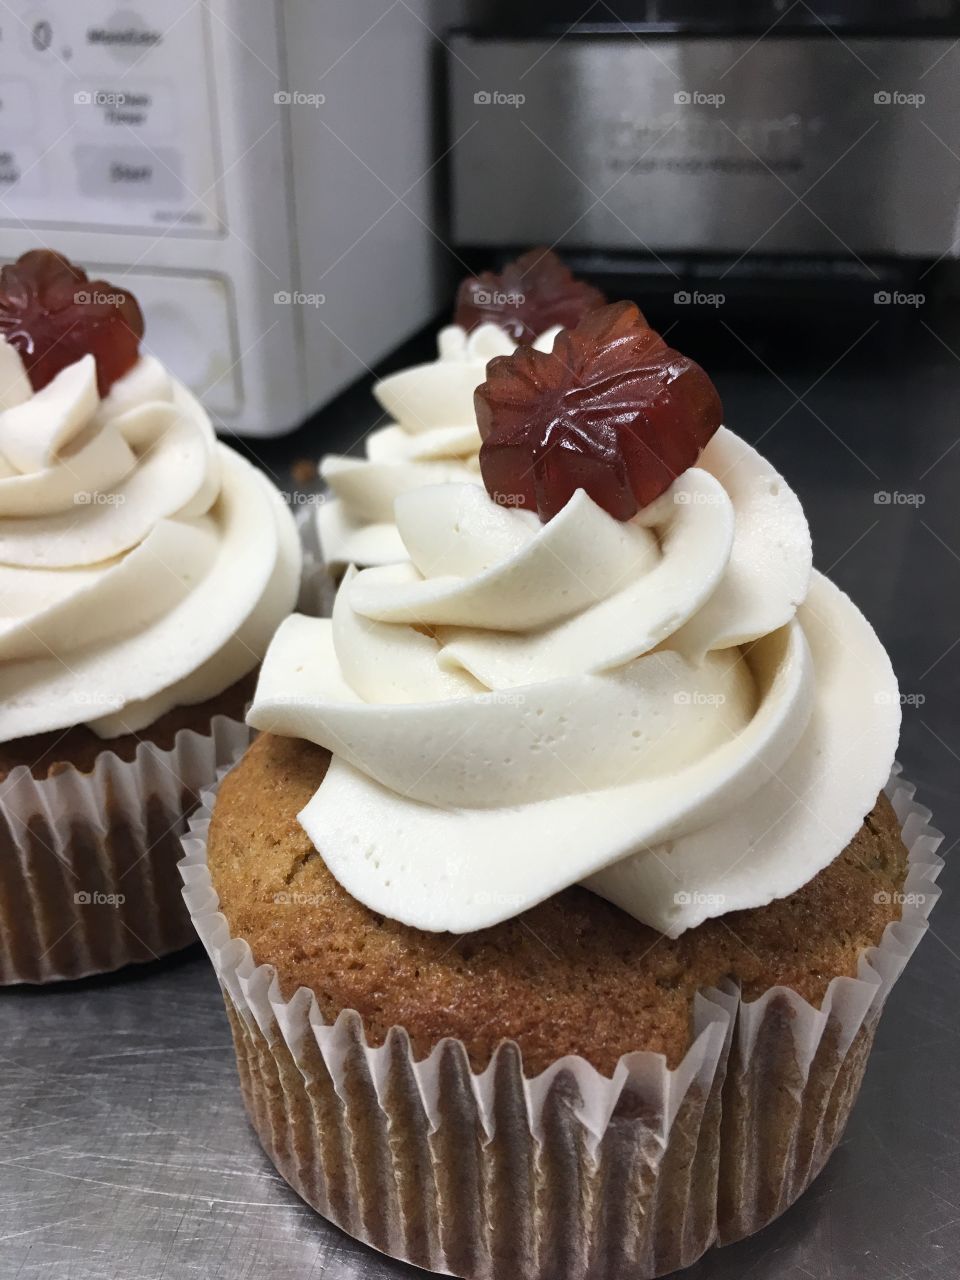 Maple sapping brings spice cake cupcakes with maple frosting and a maple candy on top!